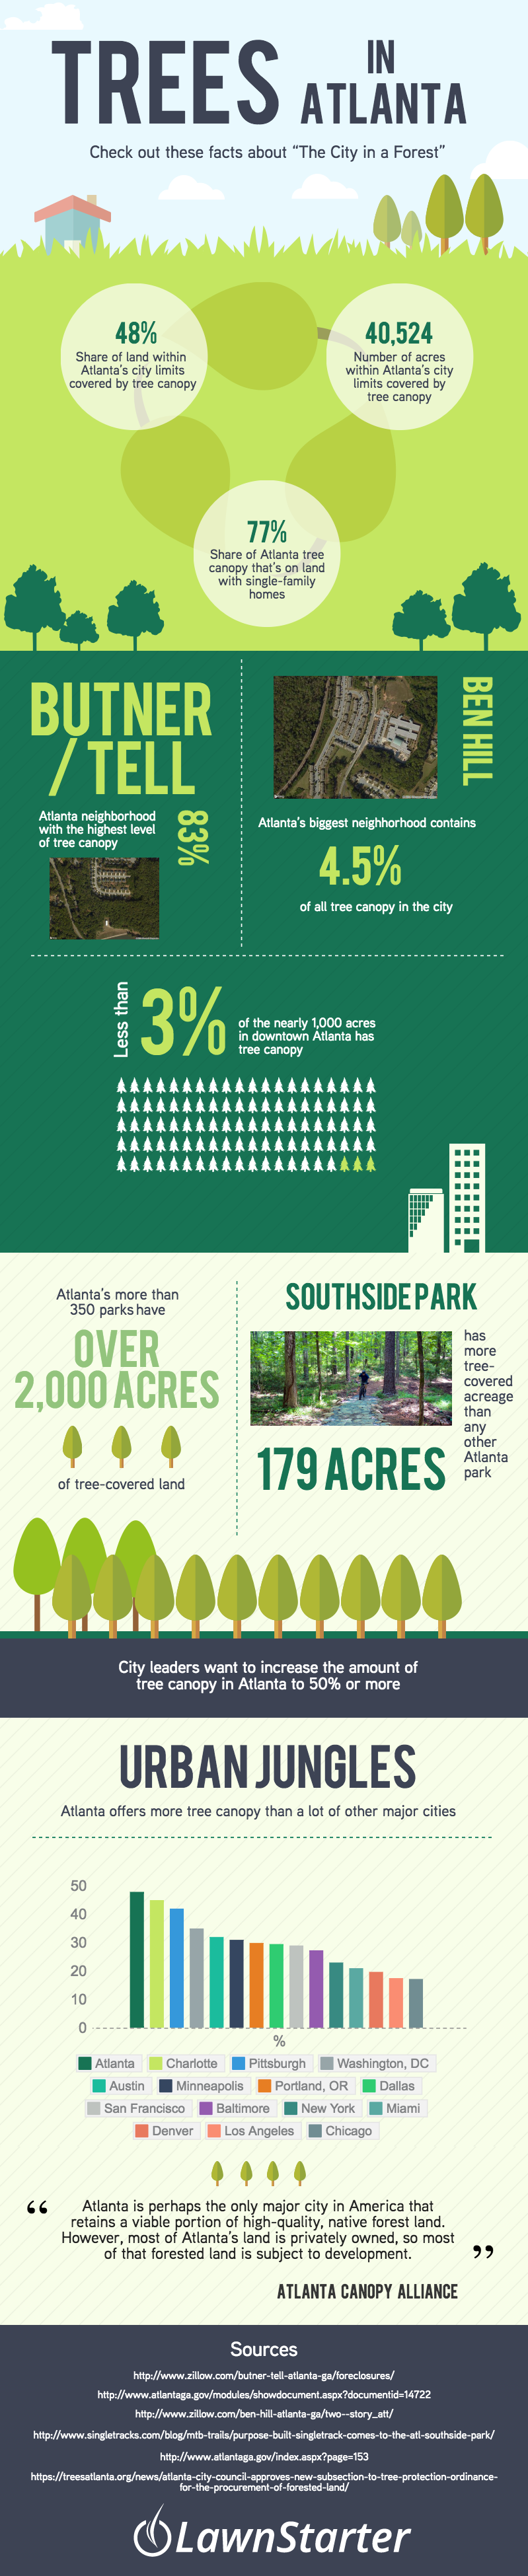 City in a Forest: A Look at Atlanta’s Trees